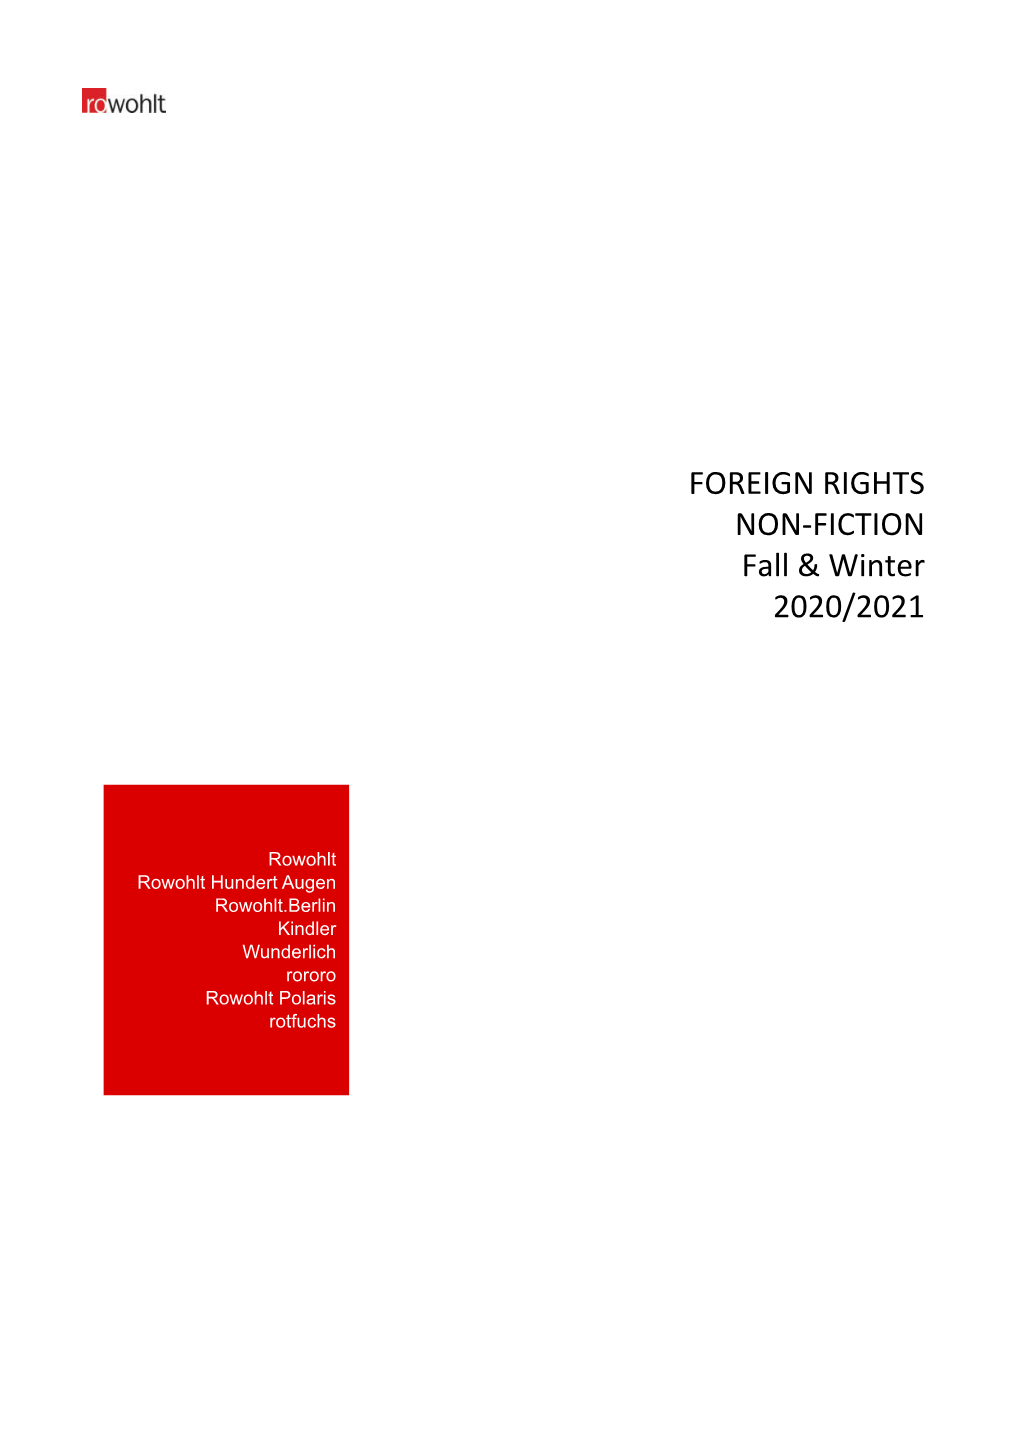 FOREIGN RIGHTS NON-FICTION Fall & Winter 2020/2021